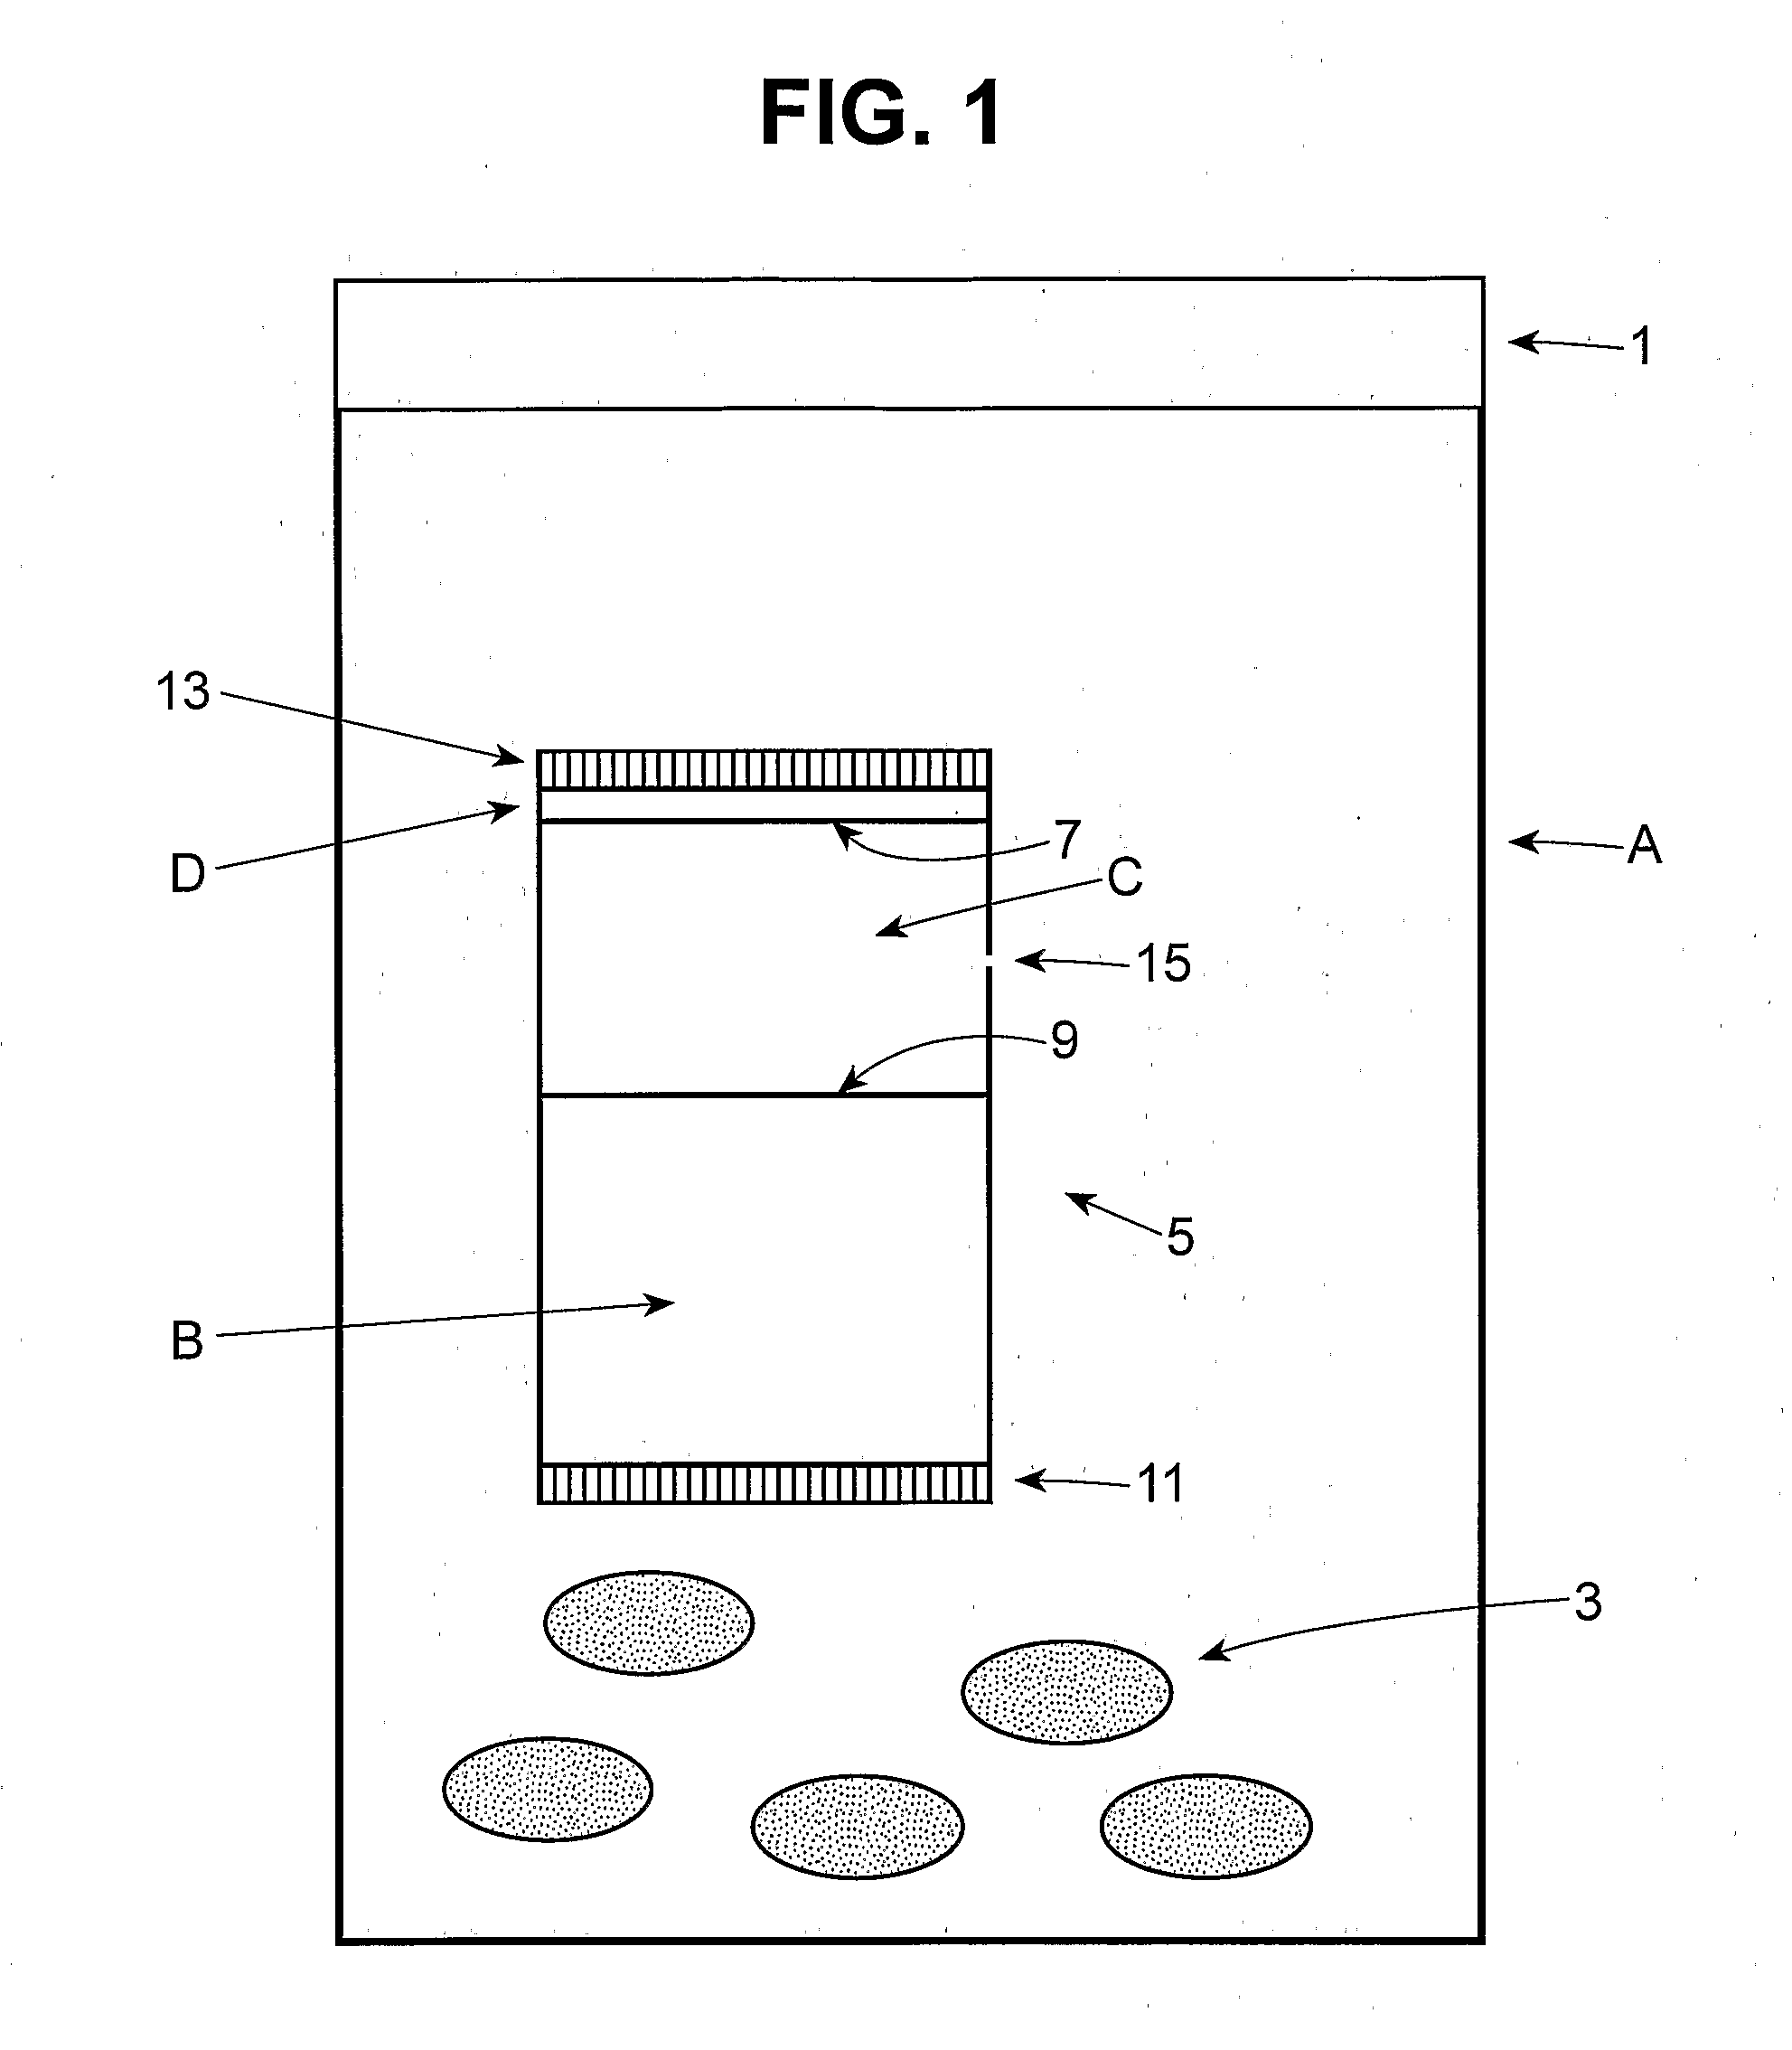 Package and device for simultaneously maintaining low moisture and low oxygen levels